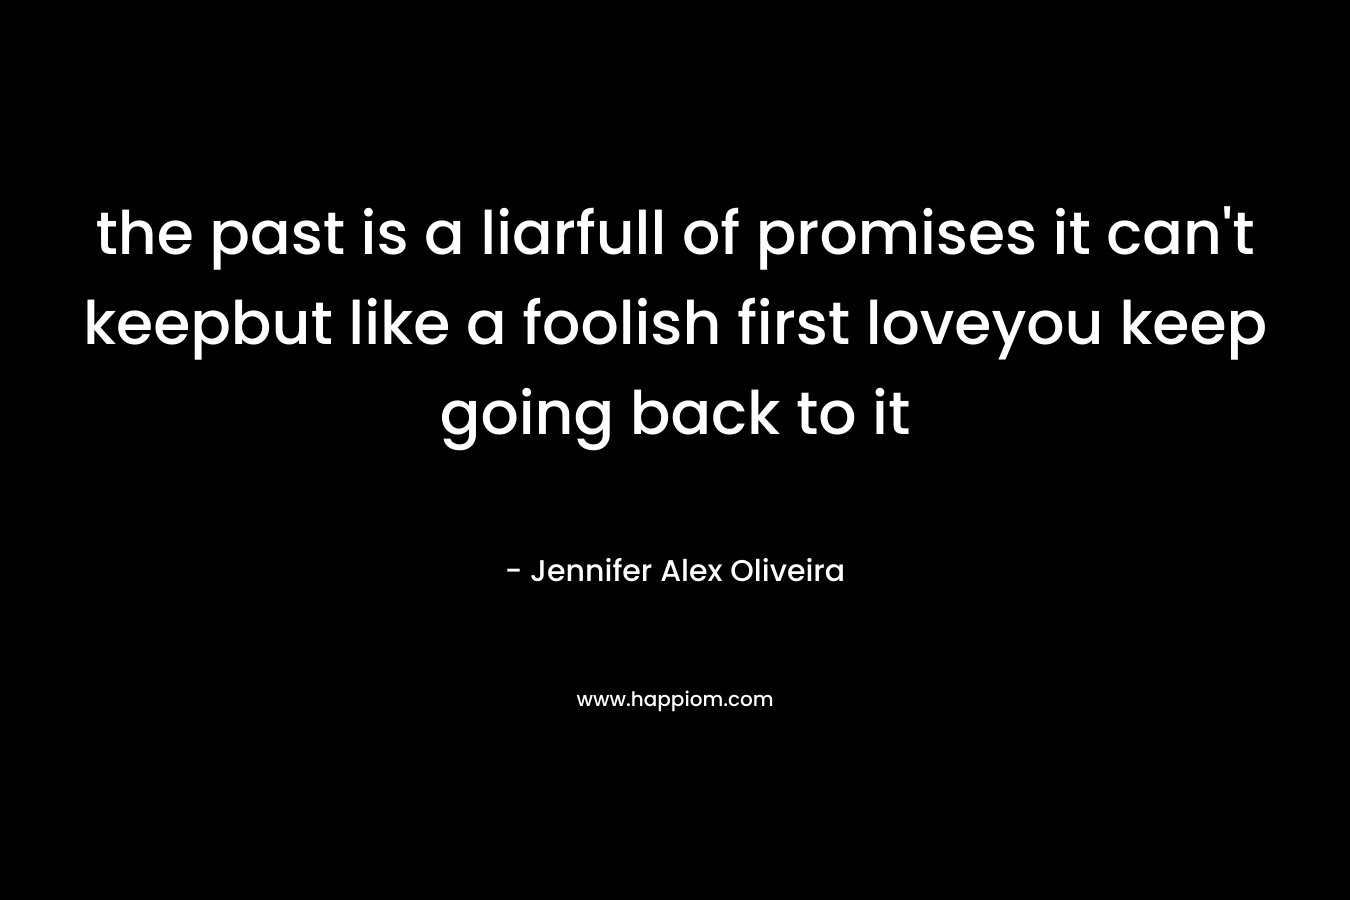 the past is a liarfull of promises it can’t keepbut like a foolish first loveyou keep going back to it – Jennifer Alex Oliveira